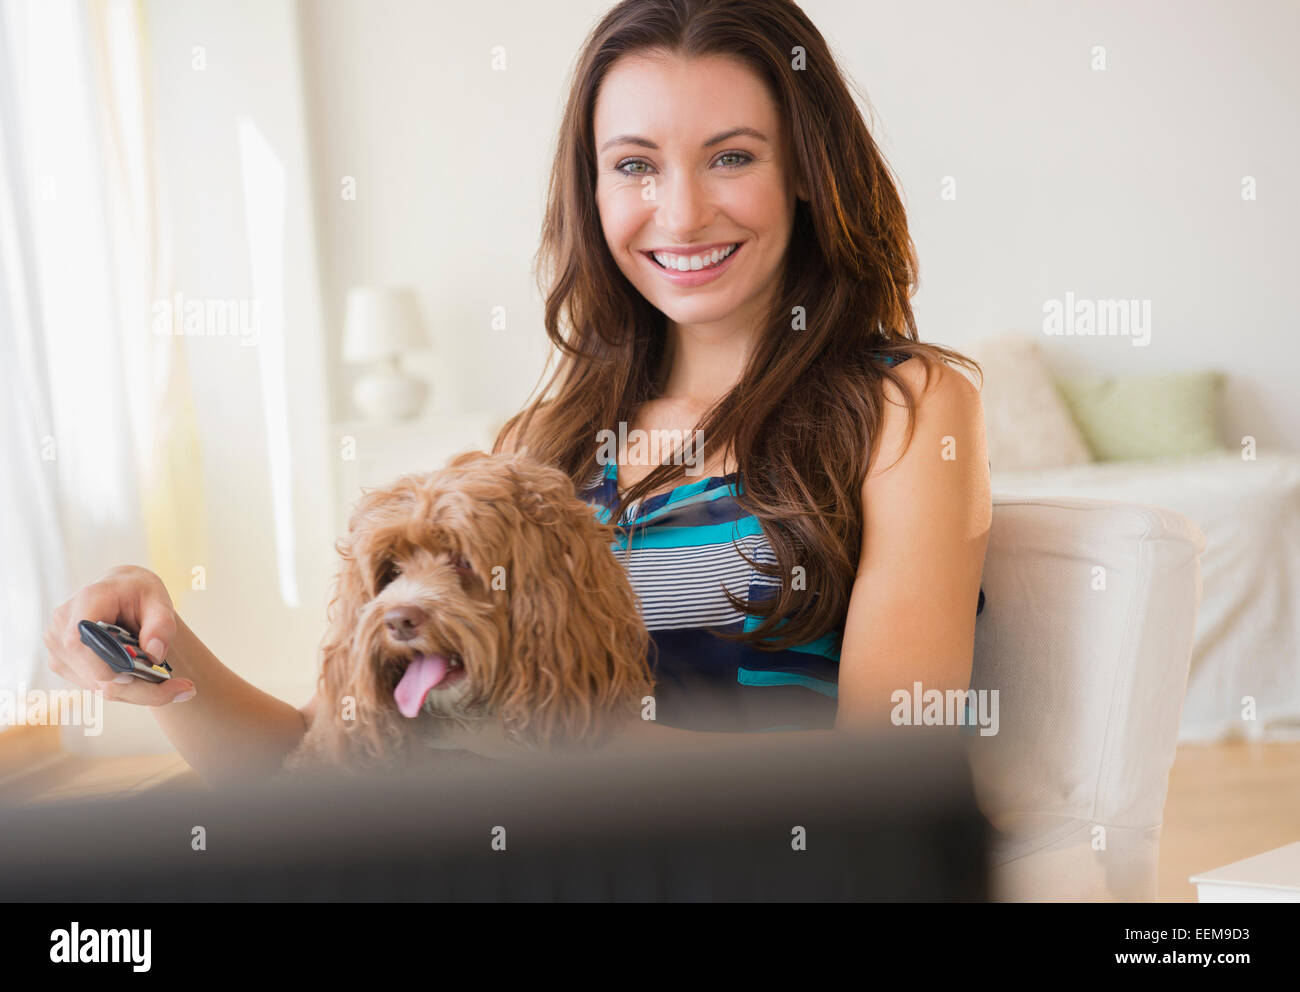 Caucasian woman watching television with pet dog Stock Photo